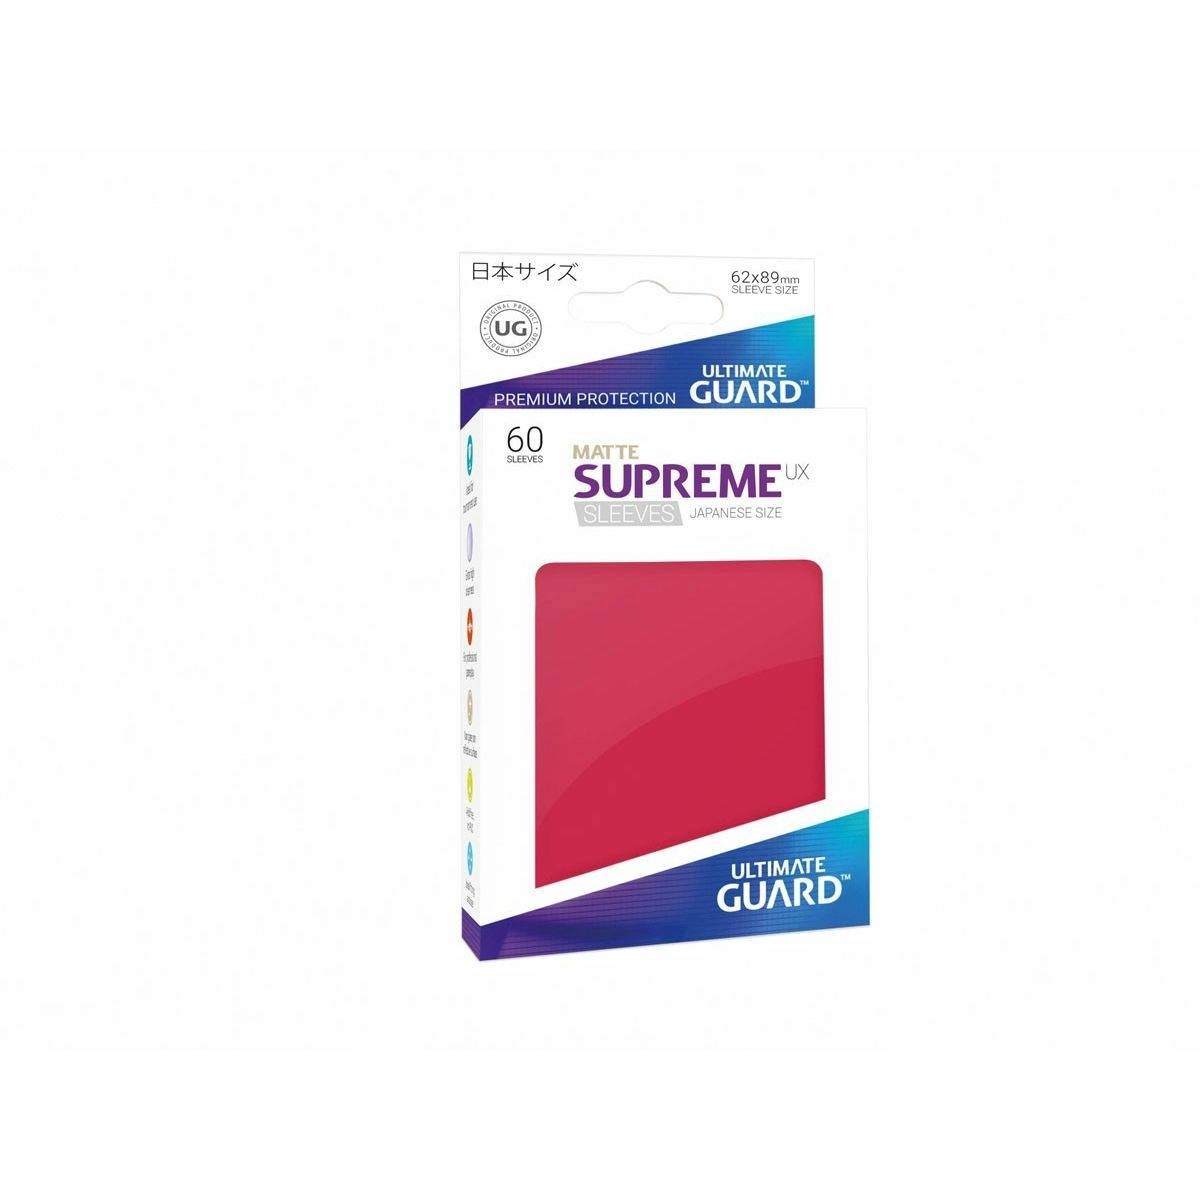 Ultimate Guard - Supreme UX Japanese Size Sleeves Matte Red (60)